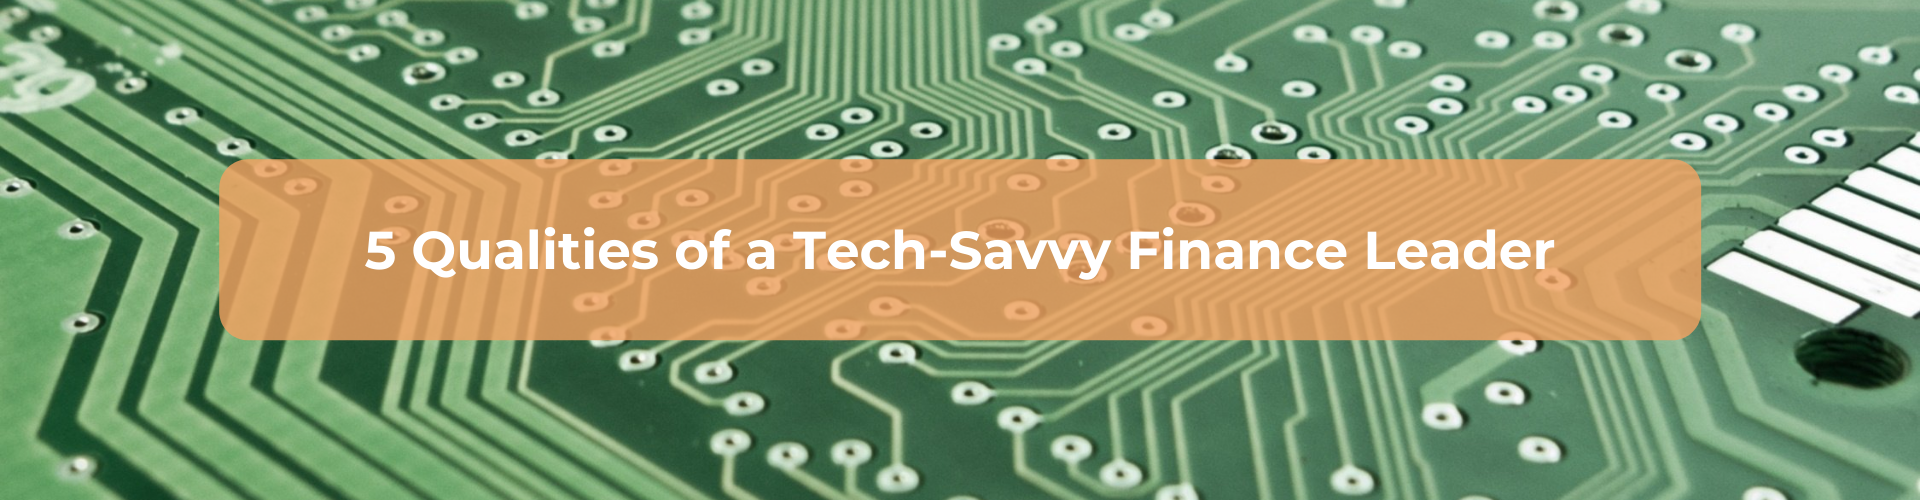 Image shows a computer chip and reads: 5 Qualities of a Tech-Savvy Finance Leader